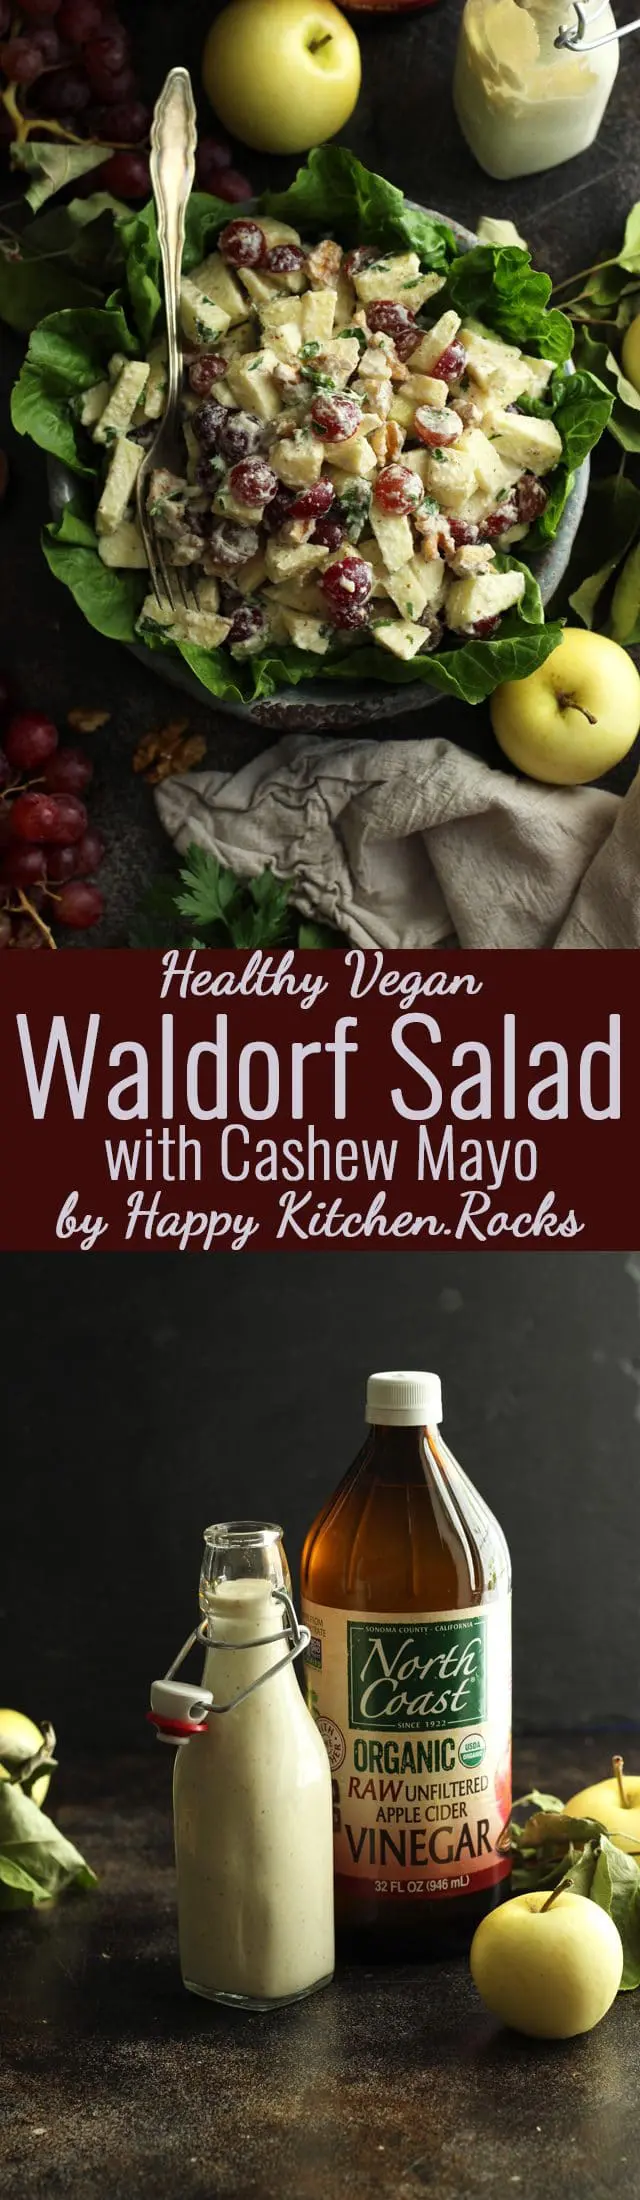 This healthy Waldorf salad is a vegan take on the classic Waldorf salad. Deliciously creamy apple cider vinegar dressing is used instead of mayonnaise for a lighter and fresher version. Perfect for your Labor Day vegan menu! @nthcoastorganic #ad #nodairy #salad #waldorfsalad #apples #walnuts #grapes #veganreceipe #easyrecipe #paleo #labordayrecipes #healthyrecipes #saladrecipes #recipe #recipes #sidedish #summersidedish #lunch #summersalads #picnicrecipe #fallrecipe